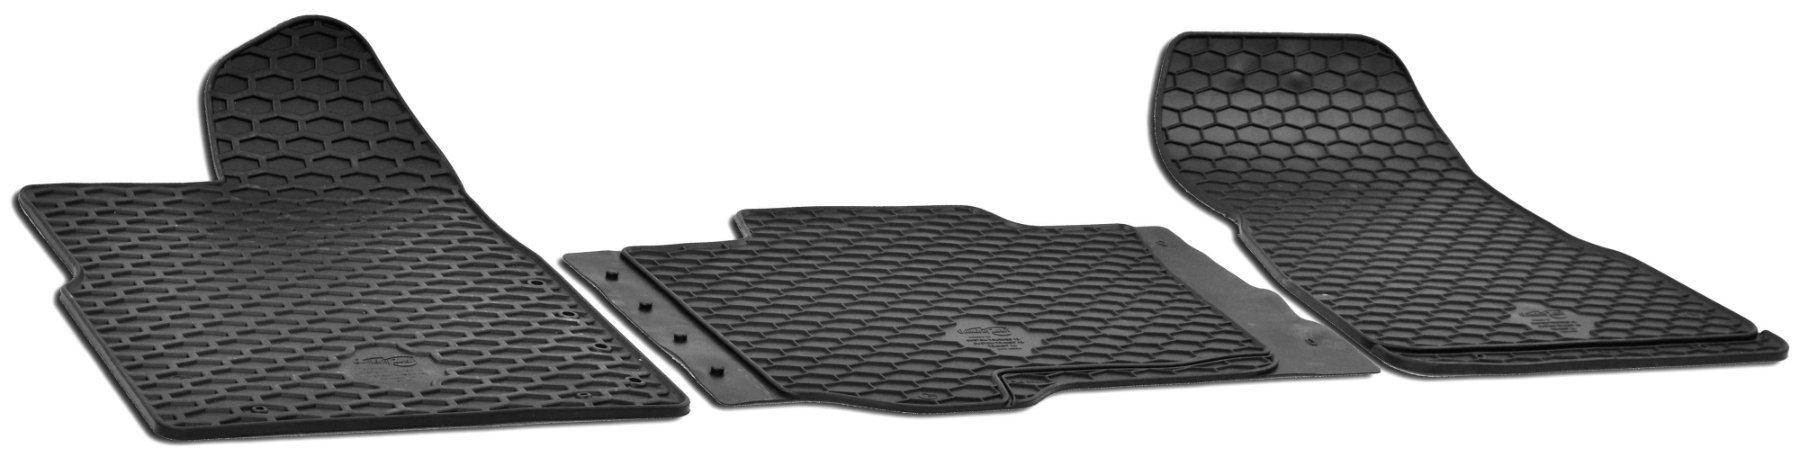 Rubber mats DirtGuard for Ford Tourneo Custom V362 04/2012-Today, Ford Transit 04/2012-Today, 3-seater front